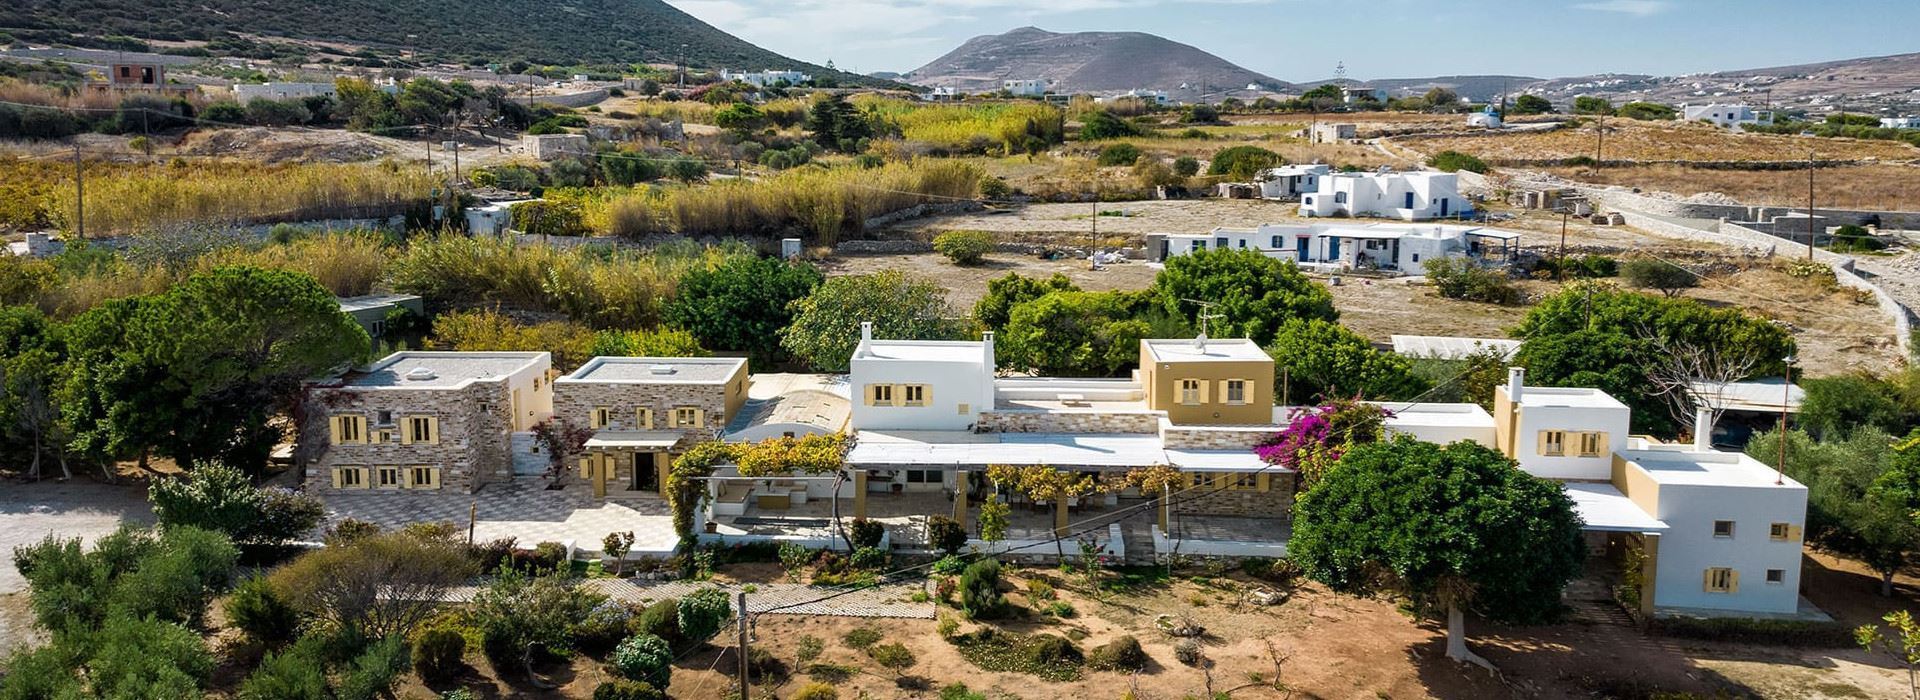 Aria Hotels adds 40 properties in its portfolio and inaugurates new investment in Paros island